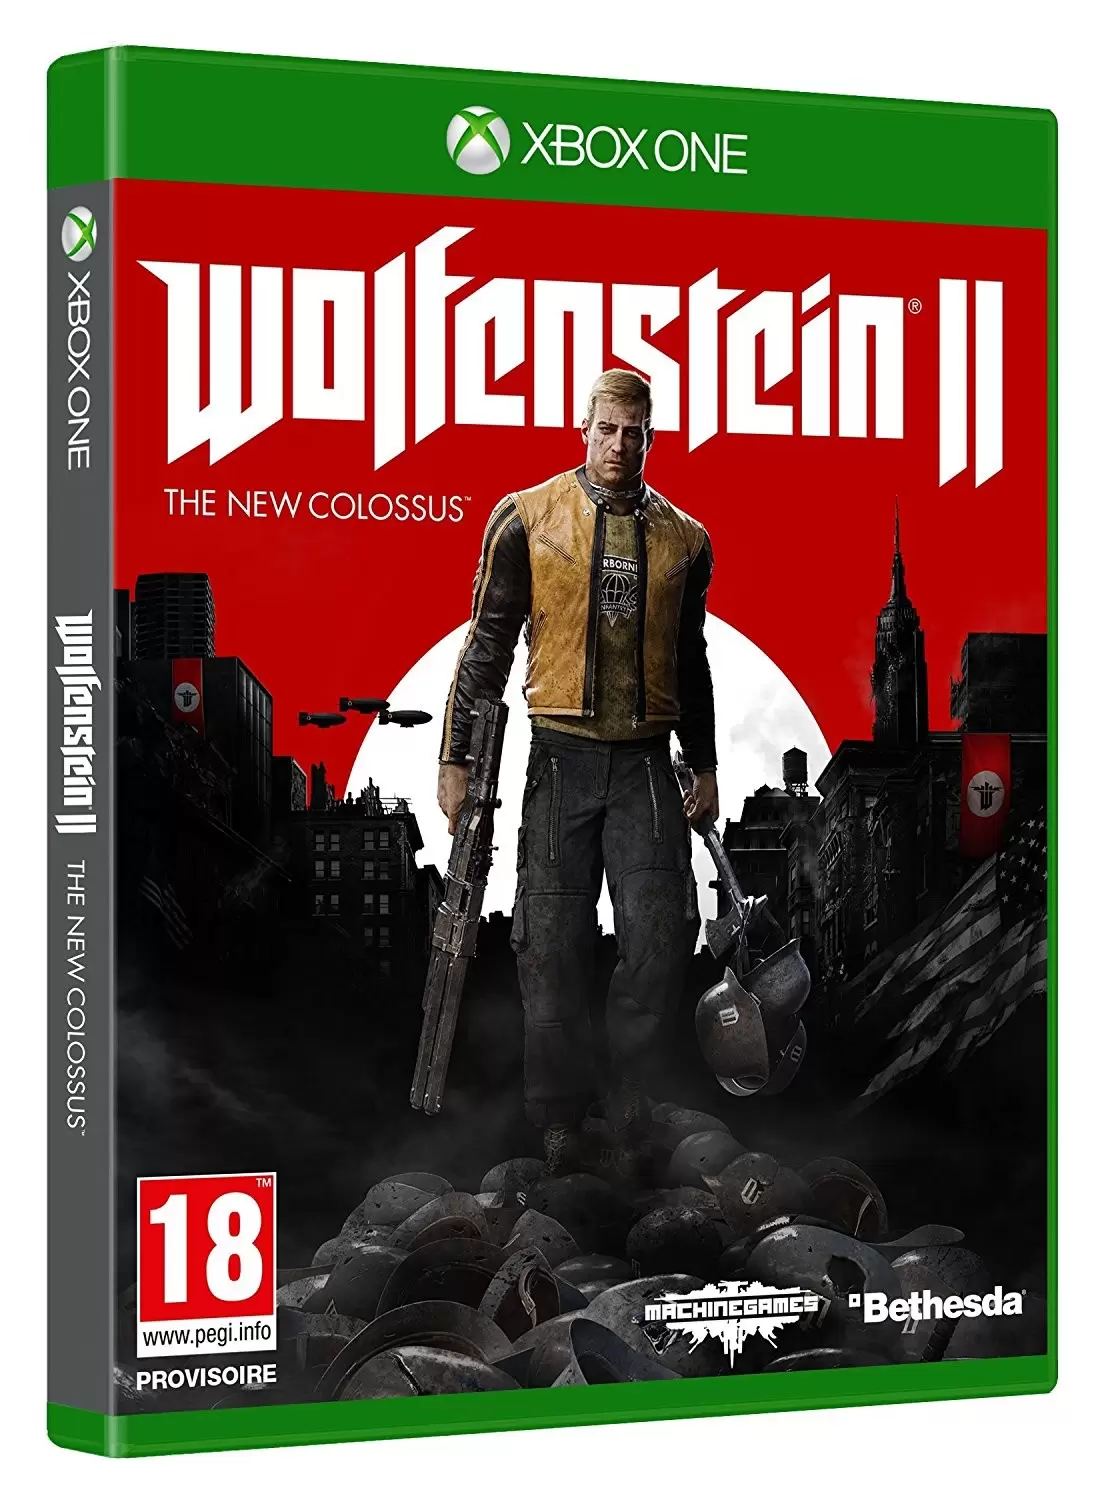 XBOX One Games - Wolfenstein II - The New Colossus